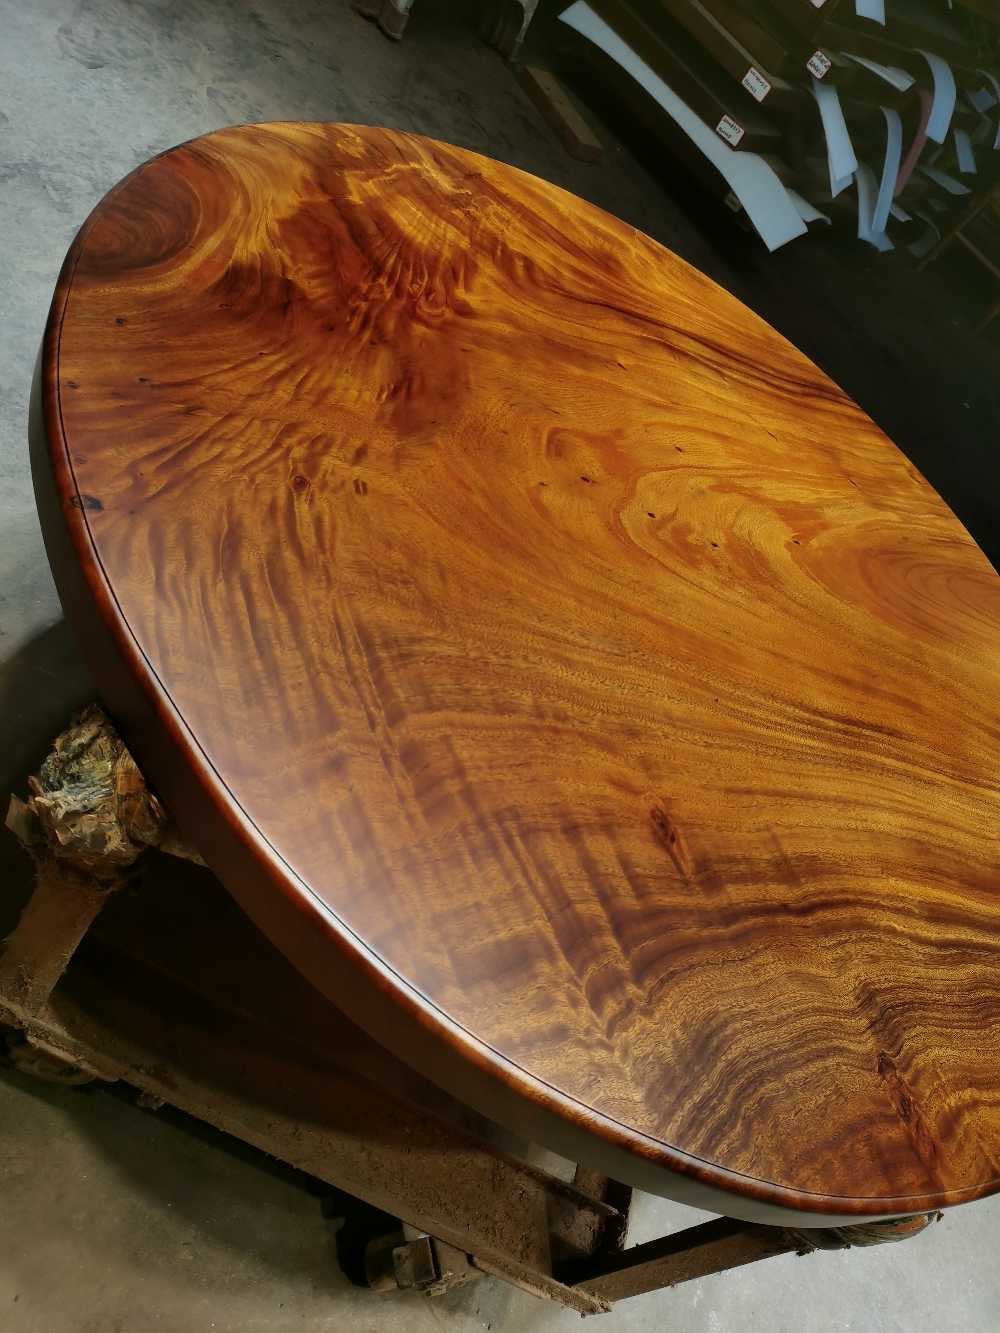 raw wood round table, not oak wood round table, unfinished wood round table tops, live edge wood round table